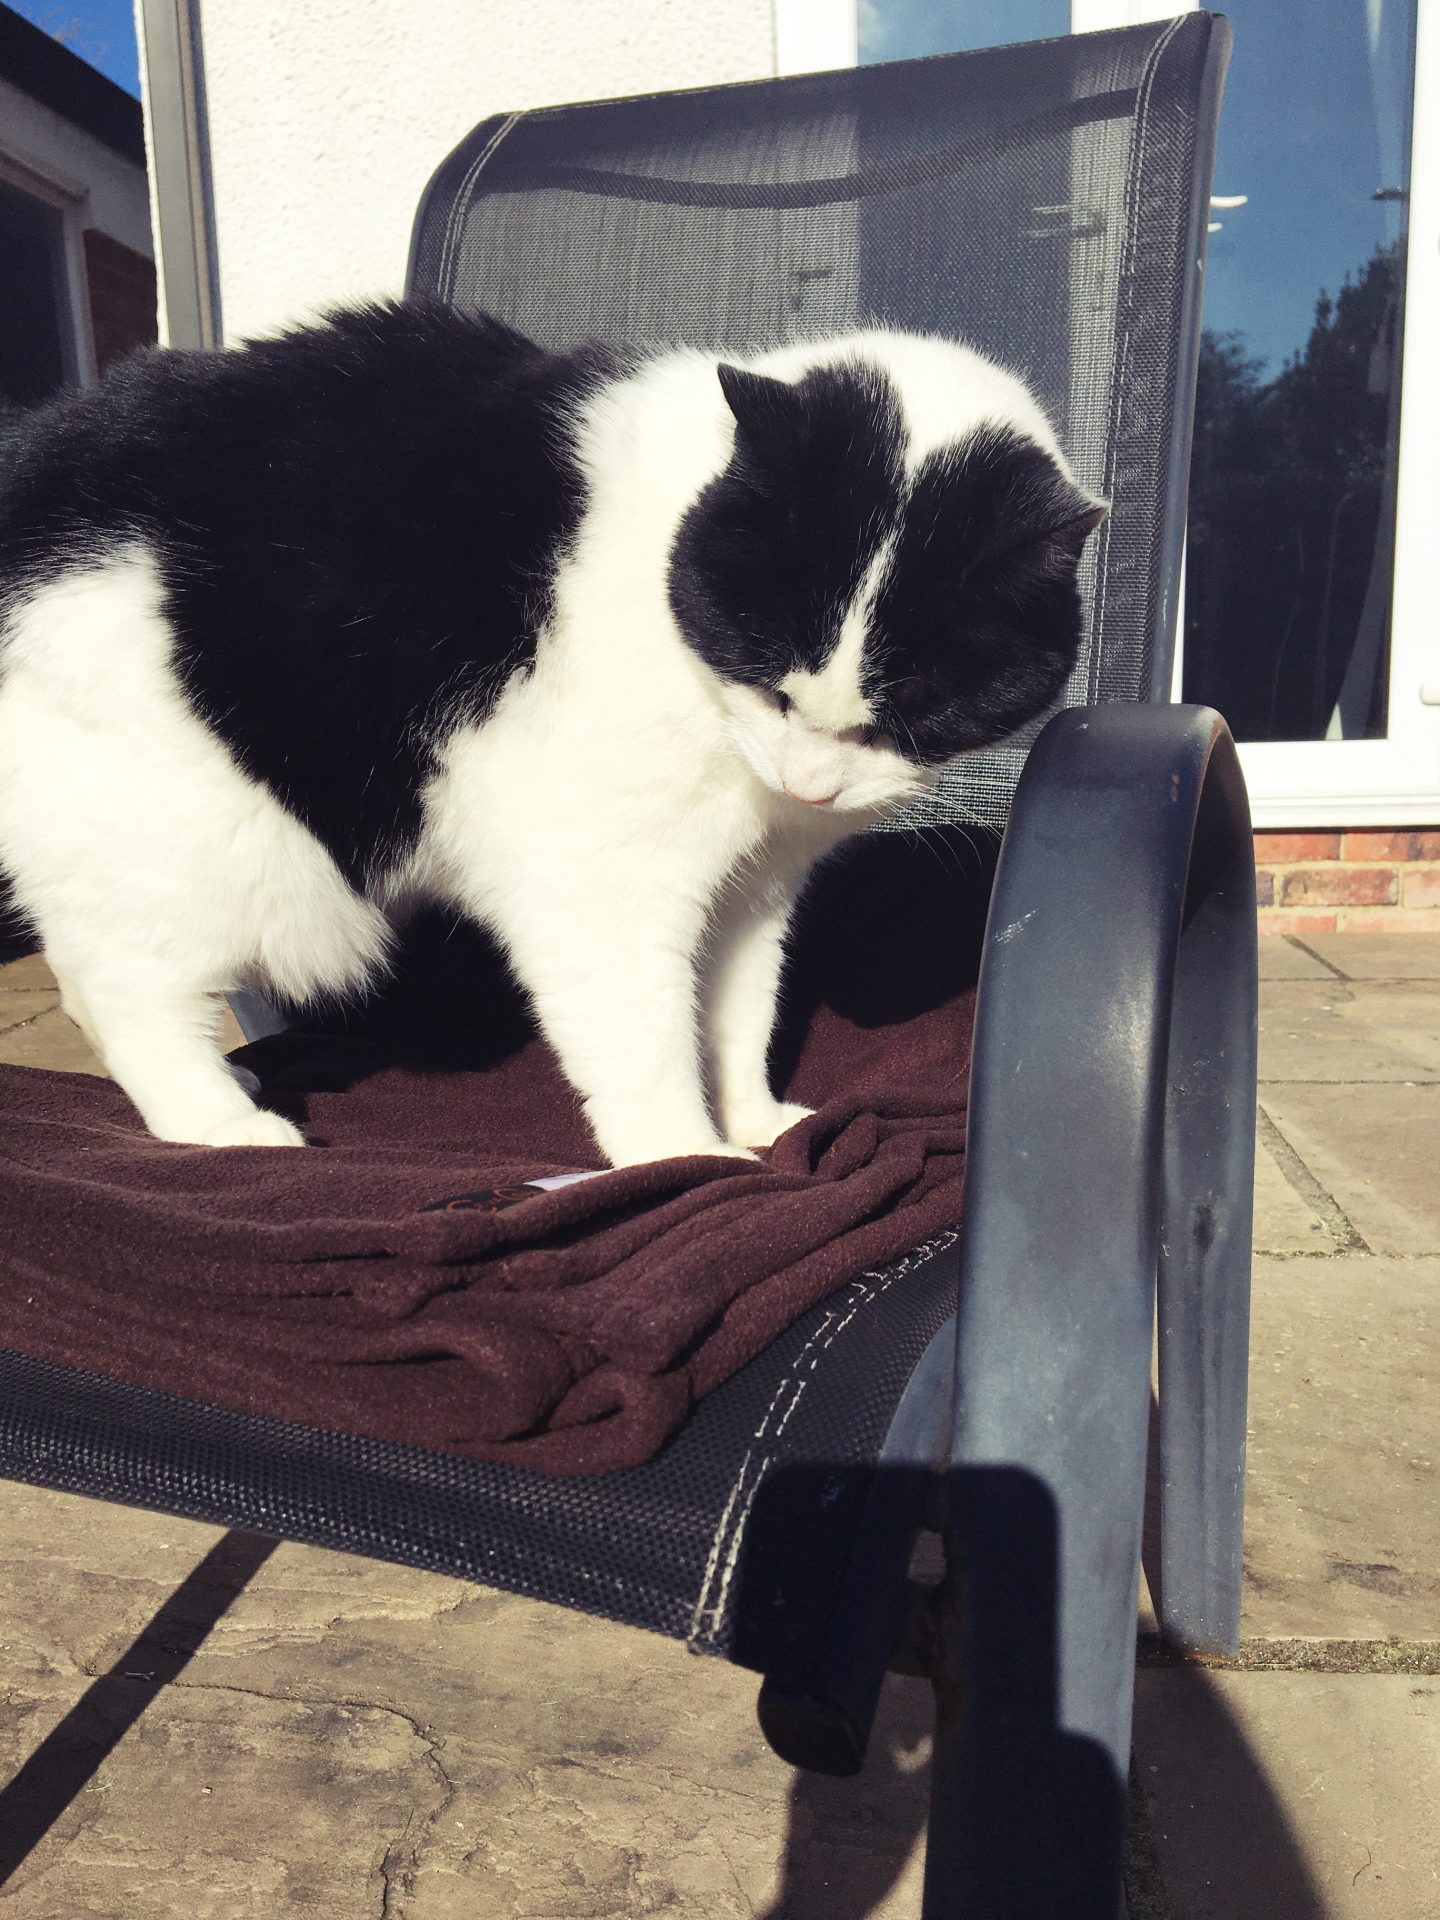 A photo of a chair outside on my patio in the garden. The Copper Clothing blanket I was gifted to review is on the chair folded up. My black and white cat is standing on it, looking down as if assessing how lovely and soft his new blanket is.